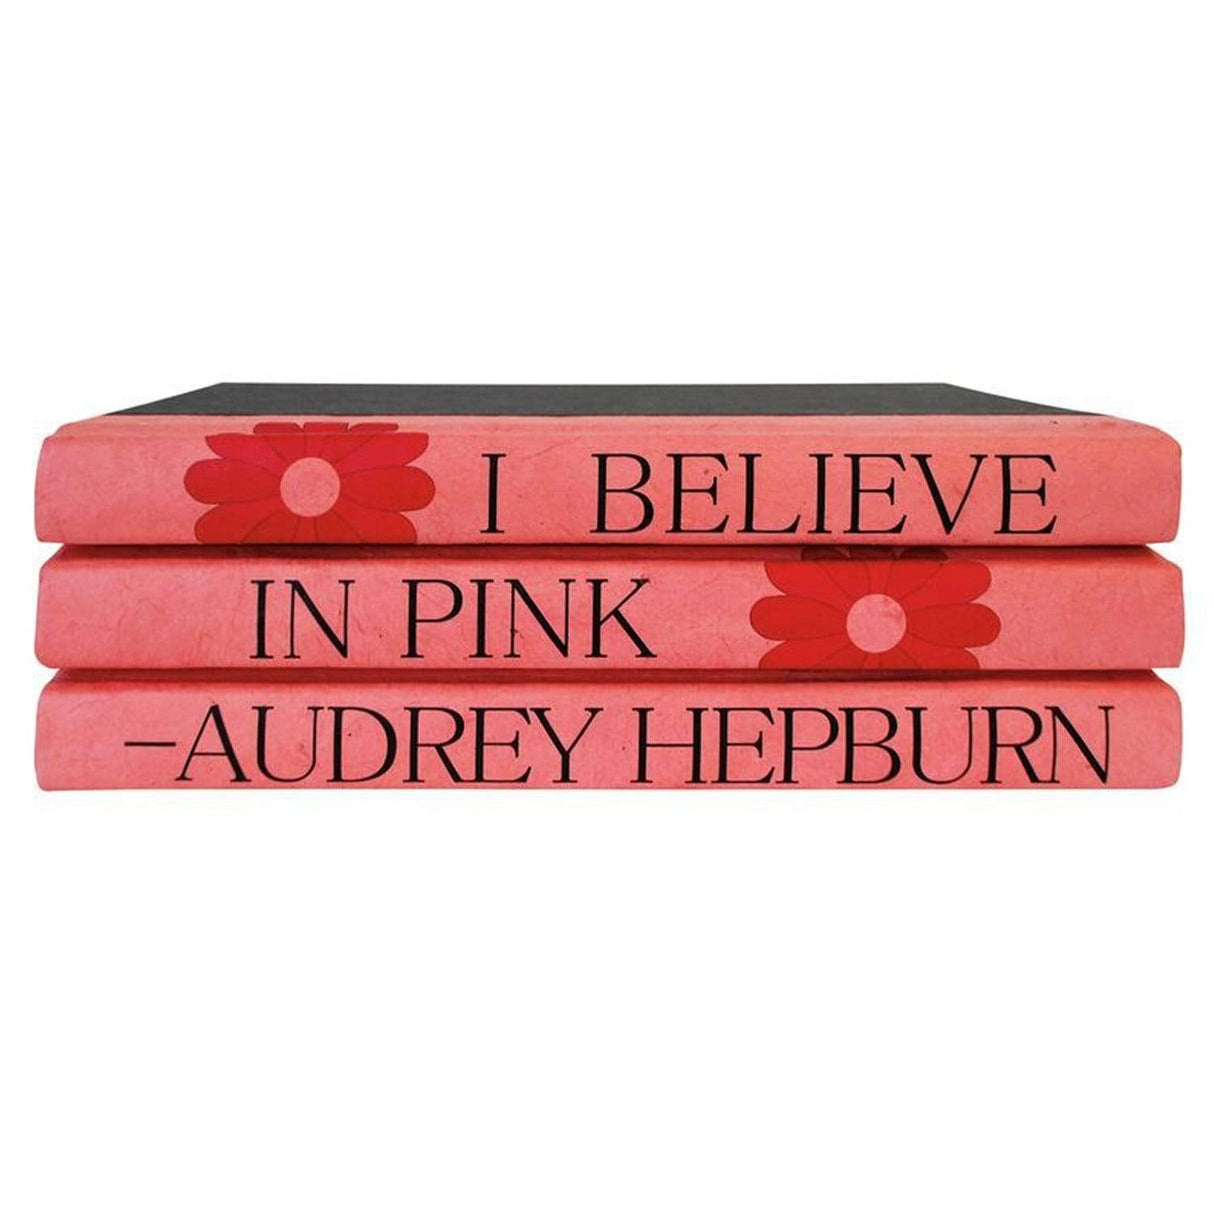 BLU BOOKS - Audrey Hepburn / "Pink" Decor E-Lawrence-QUOTES-03/PINK